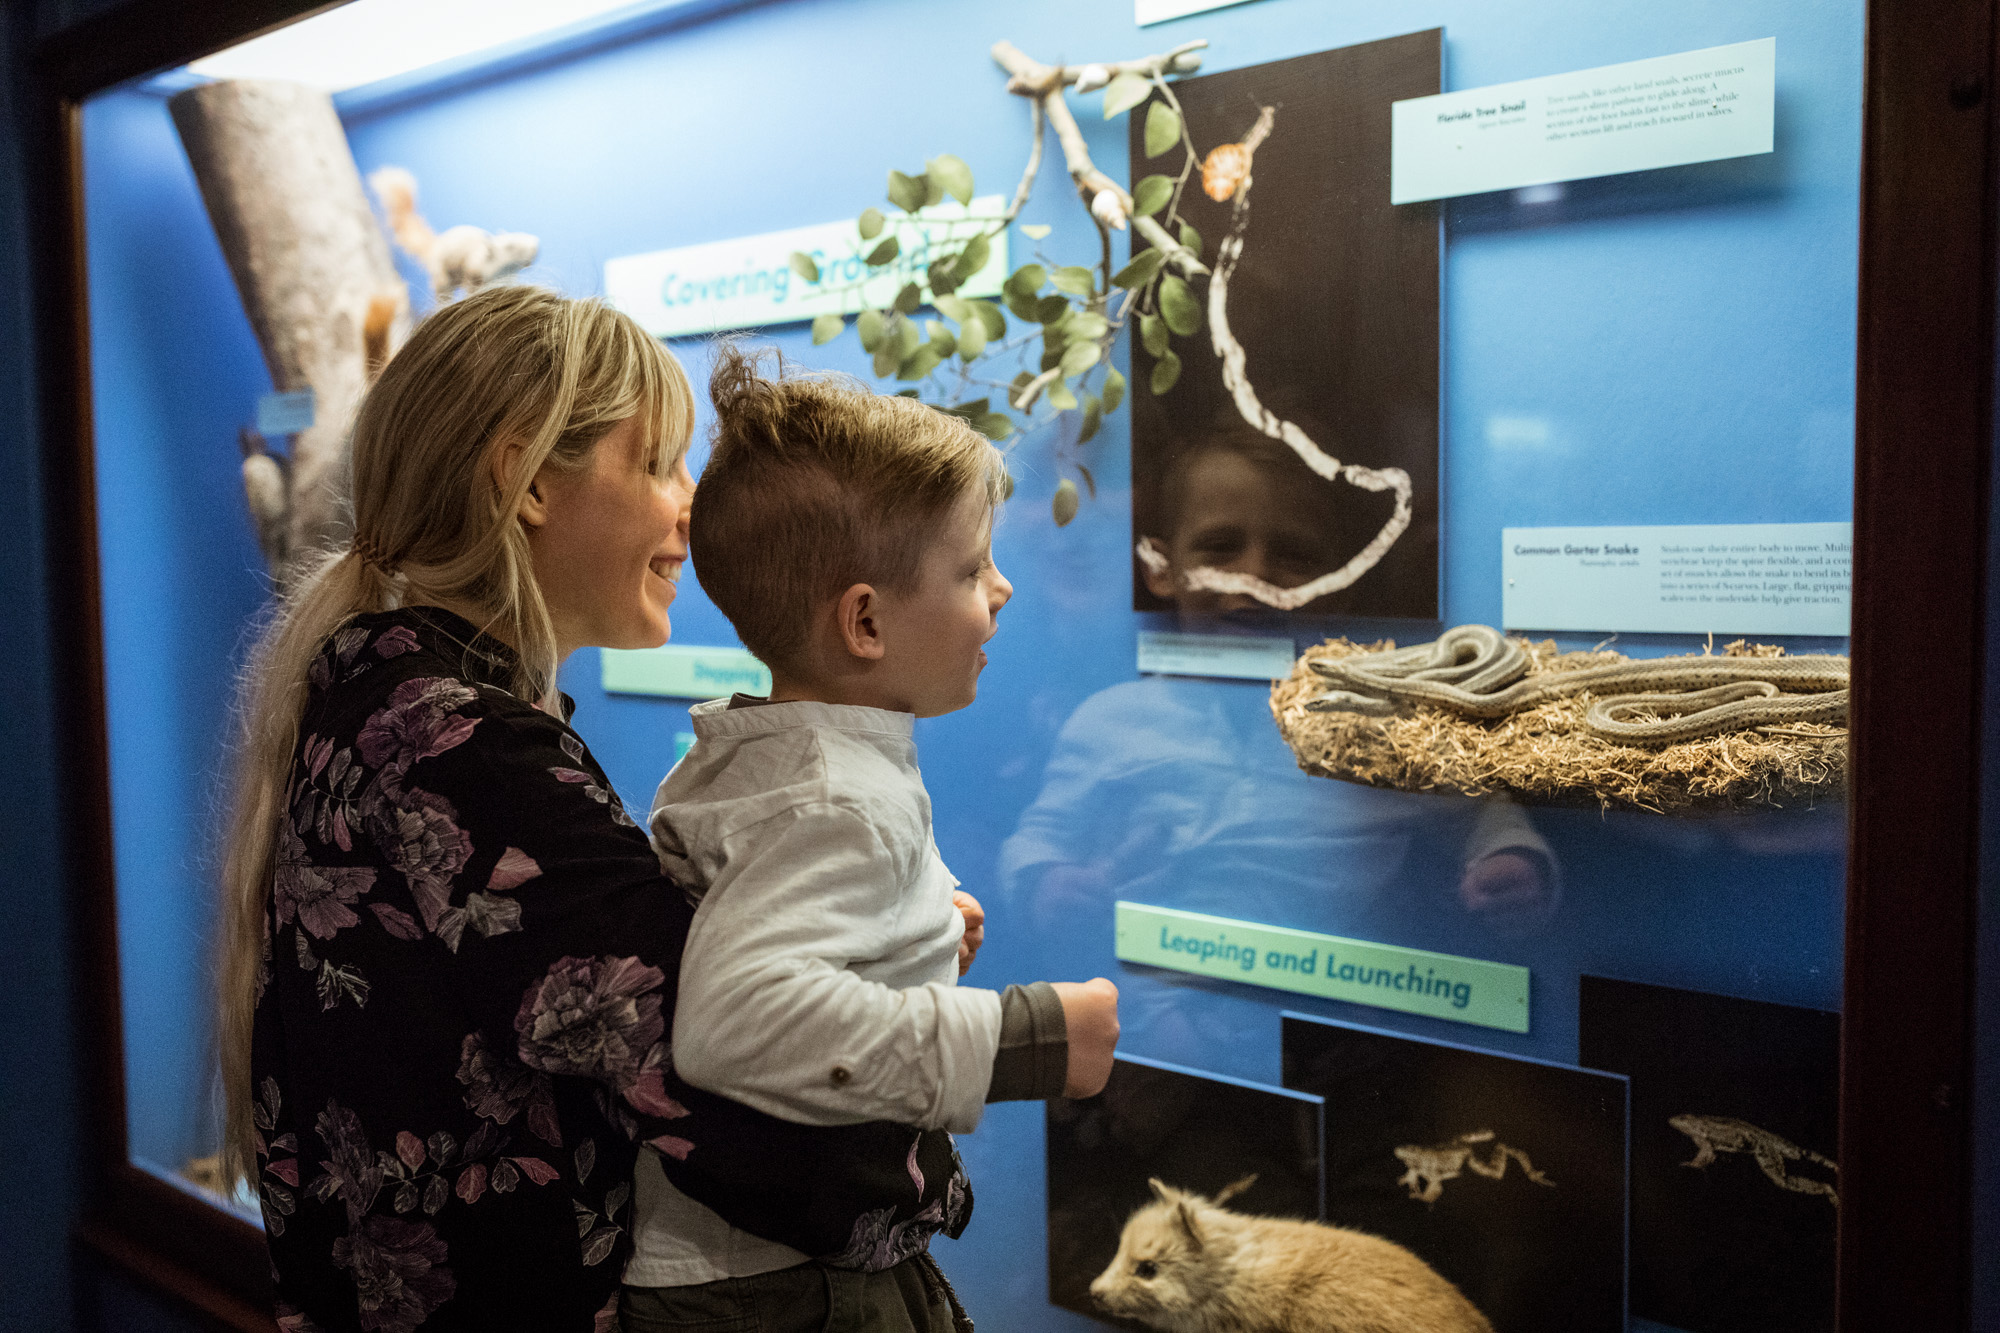 A woman holds up a little boy as they look into a taxidermy case filled with snakes, squirrels, and another small mammal.